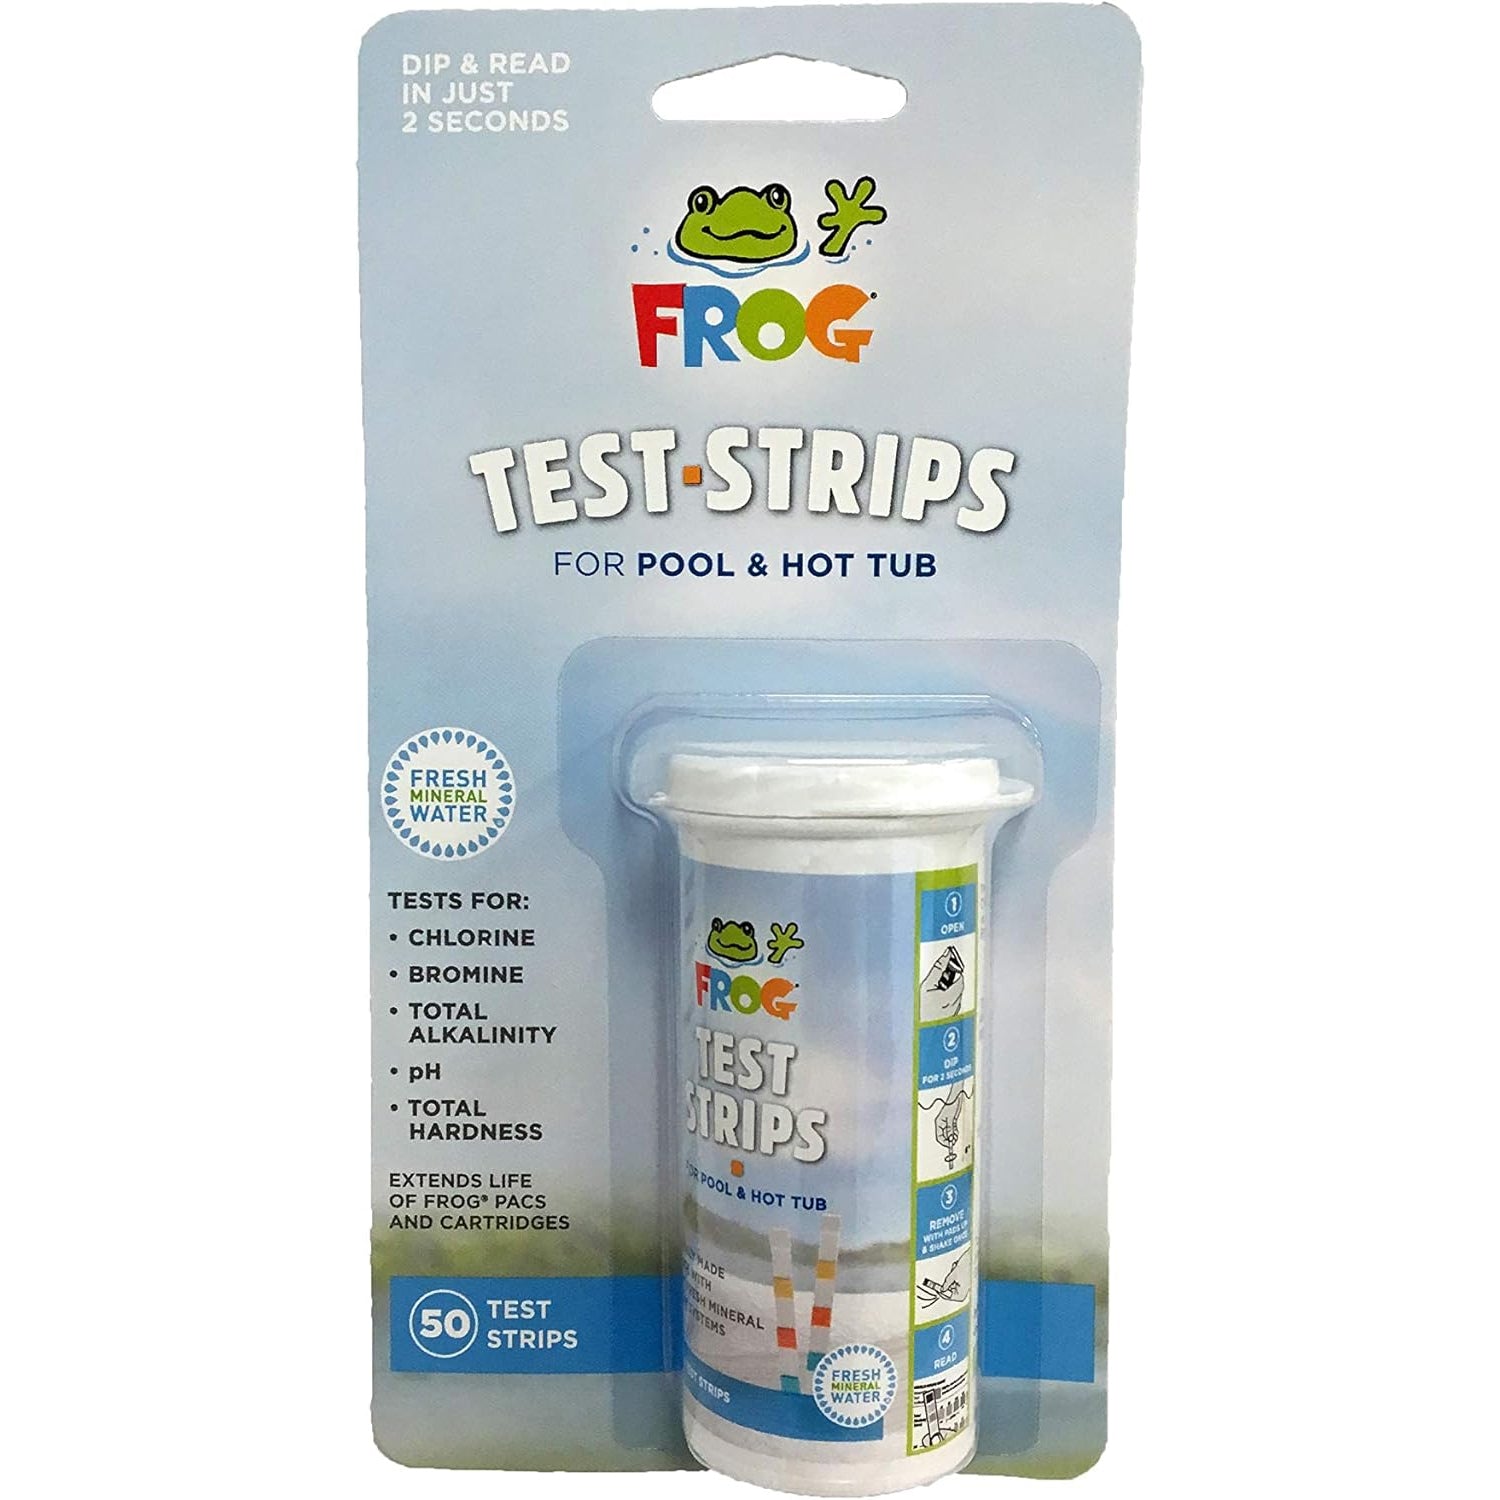 King Technology Frog Pool & Spa Test Strips Tests: Chlorine, Bromine, pH and Total Alkalinity (50 per bottle)